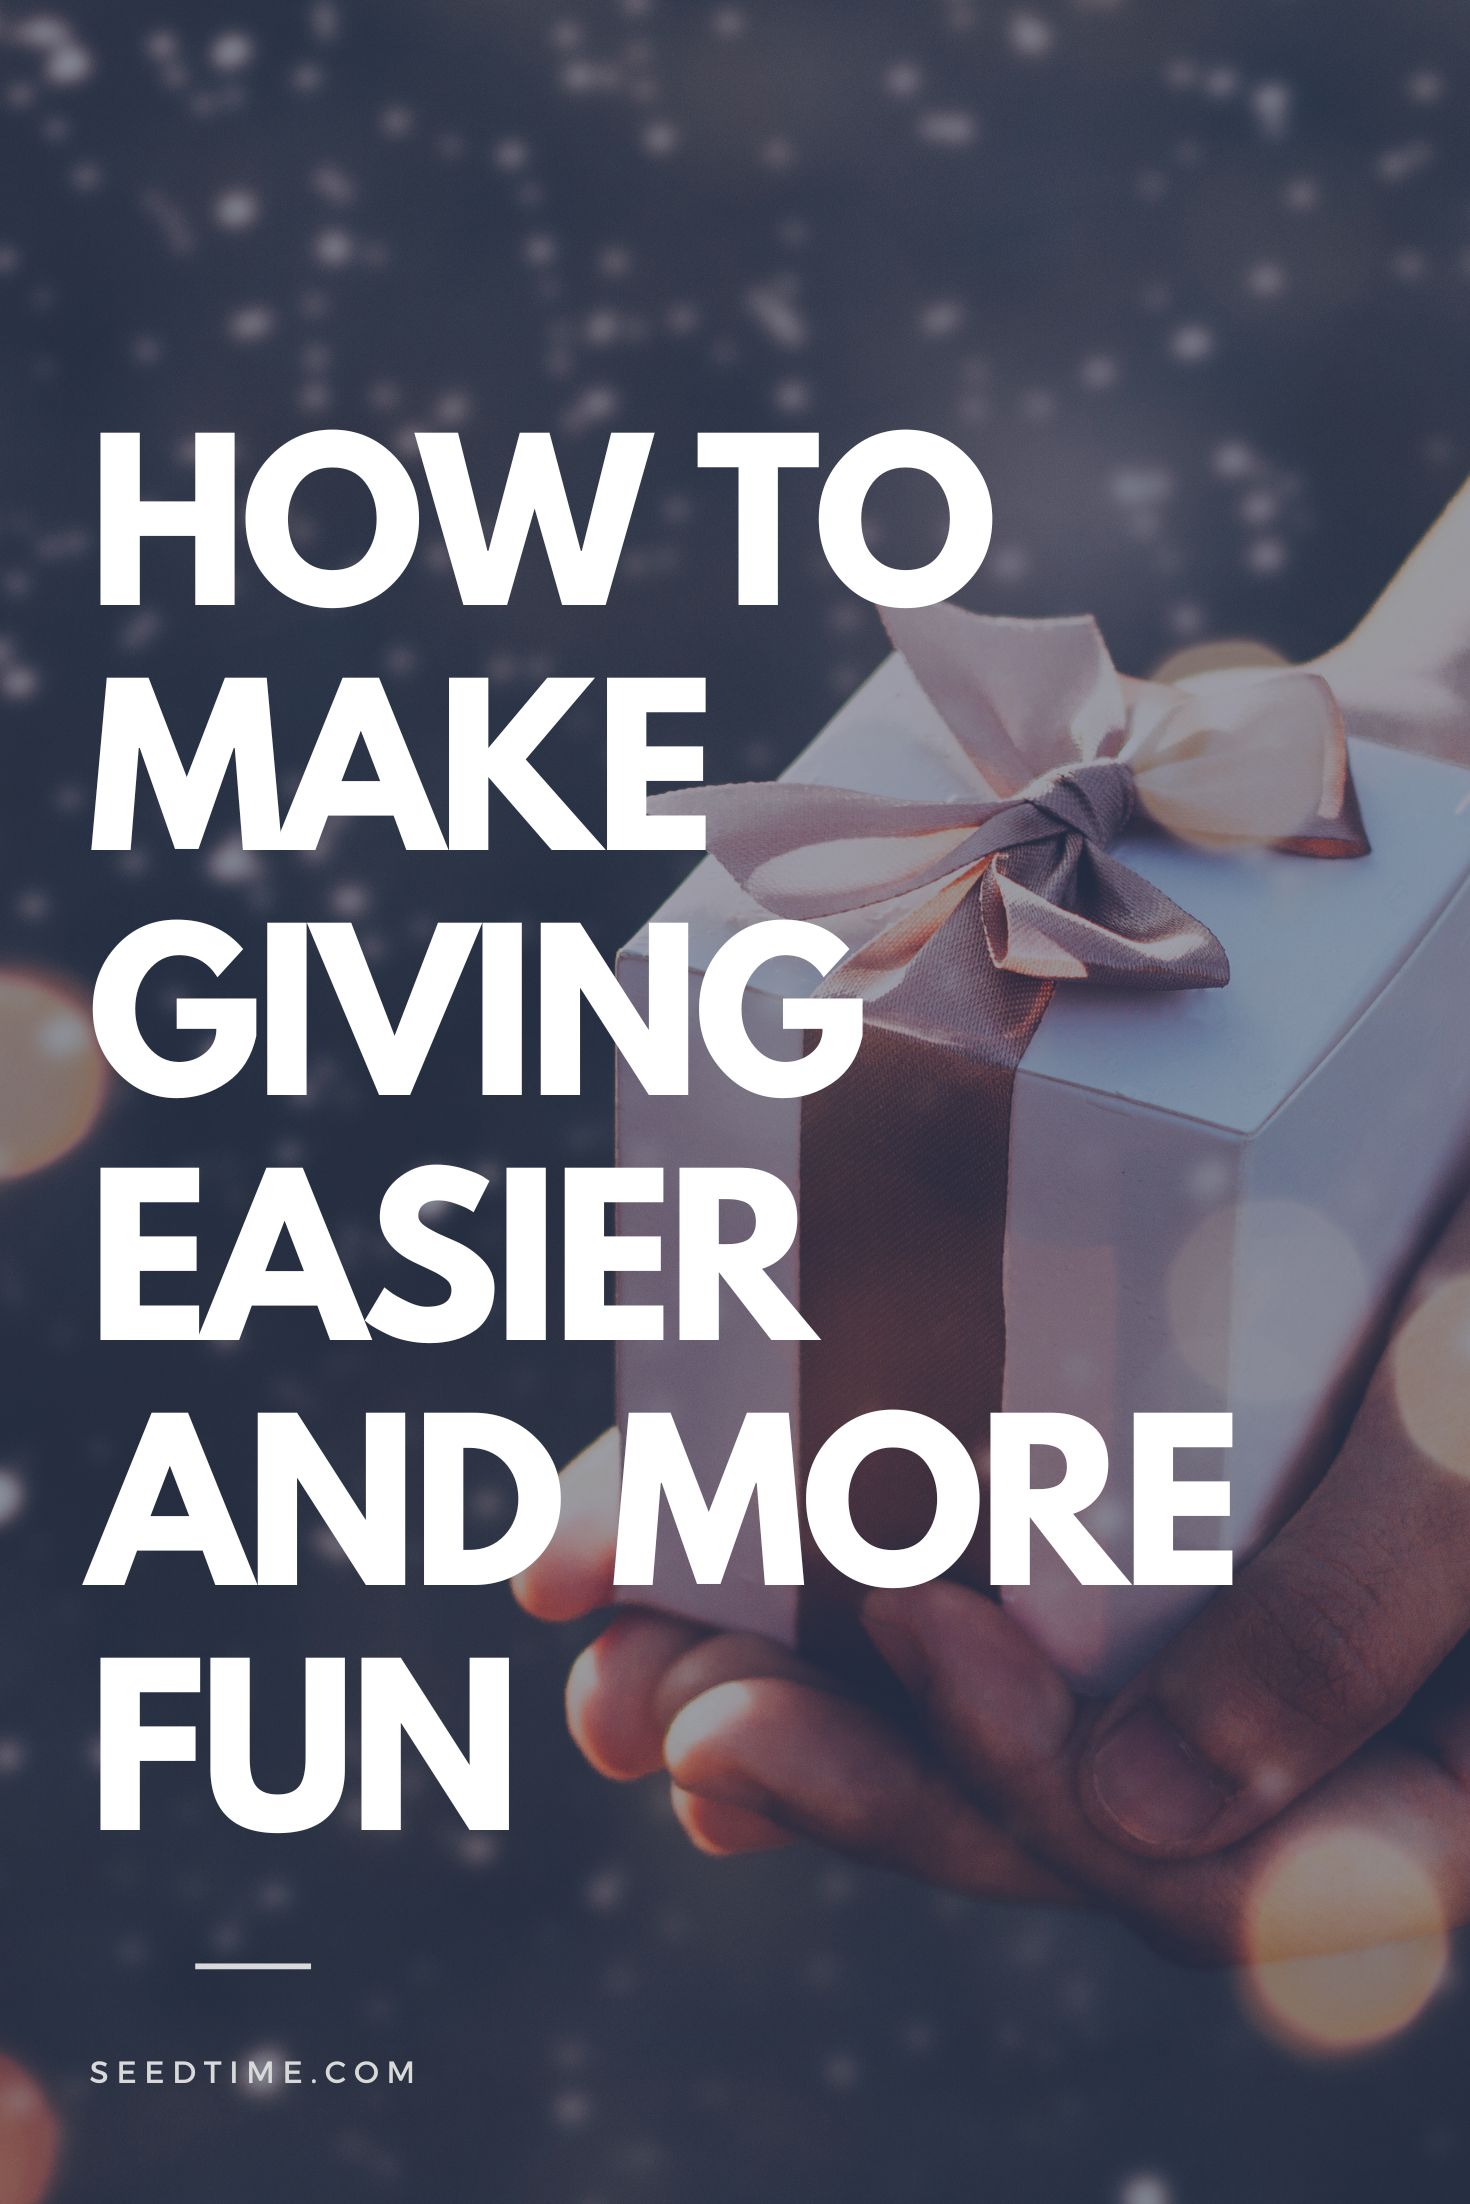 How to make giving easier and more fun